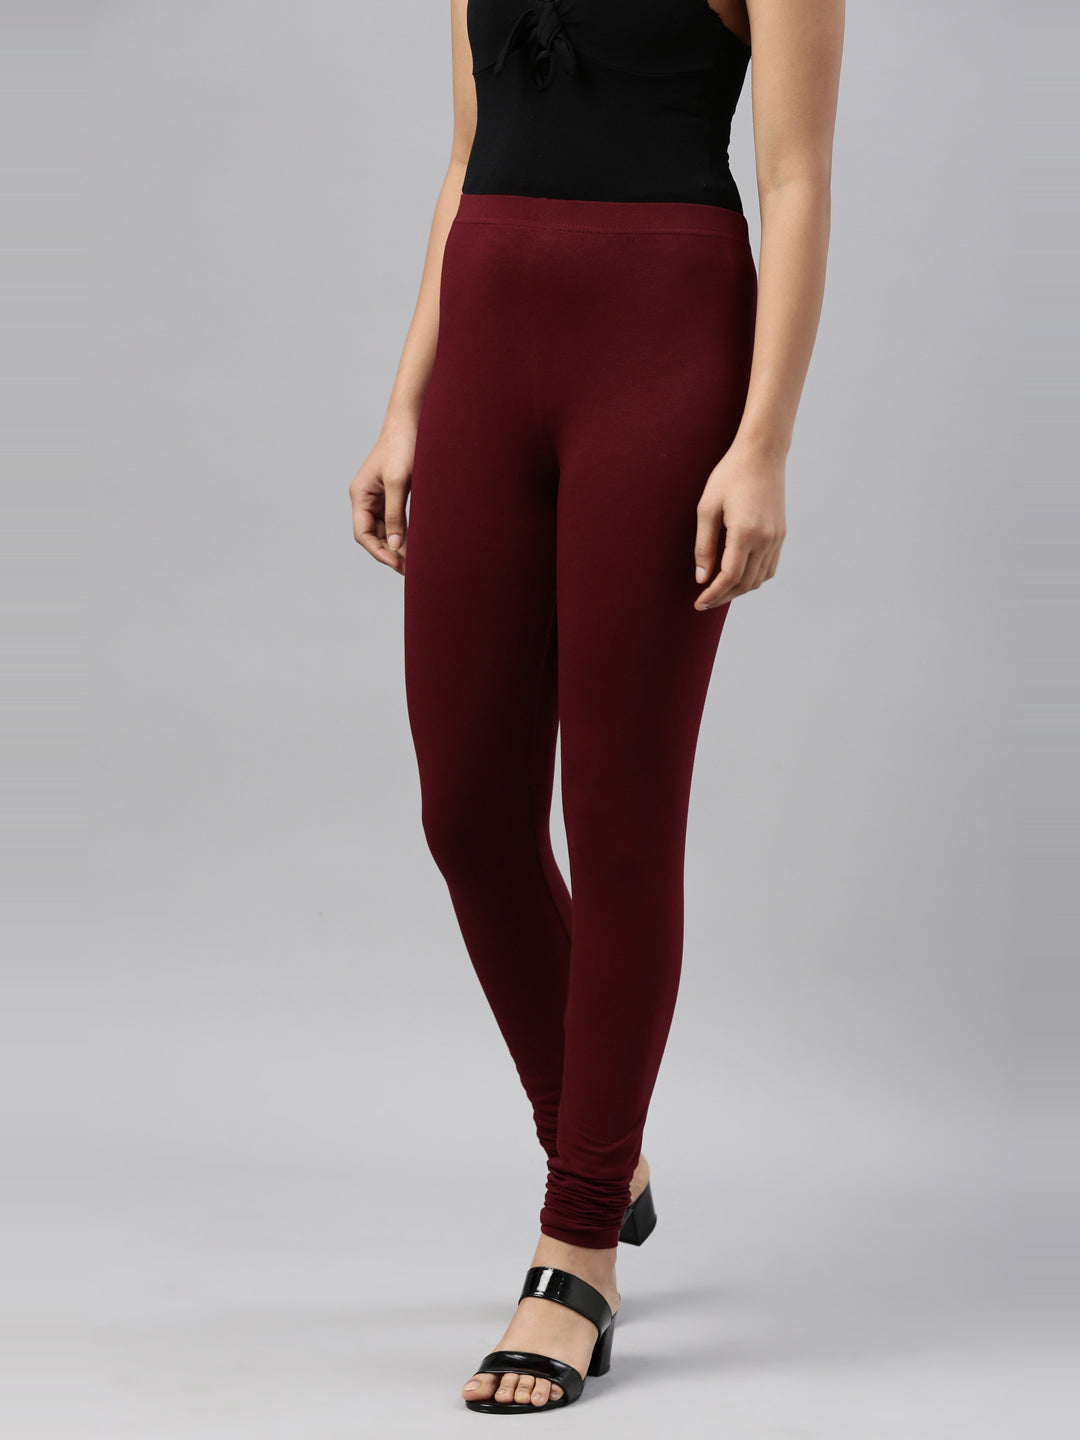 GO COLORS Women Solid Cotton Leggings (Size - S, Ebony Grey) in Bangalore  at best price by Rocky Fashions - Justdial